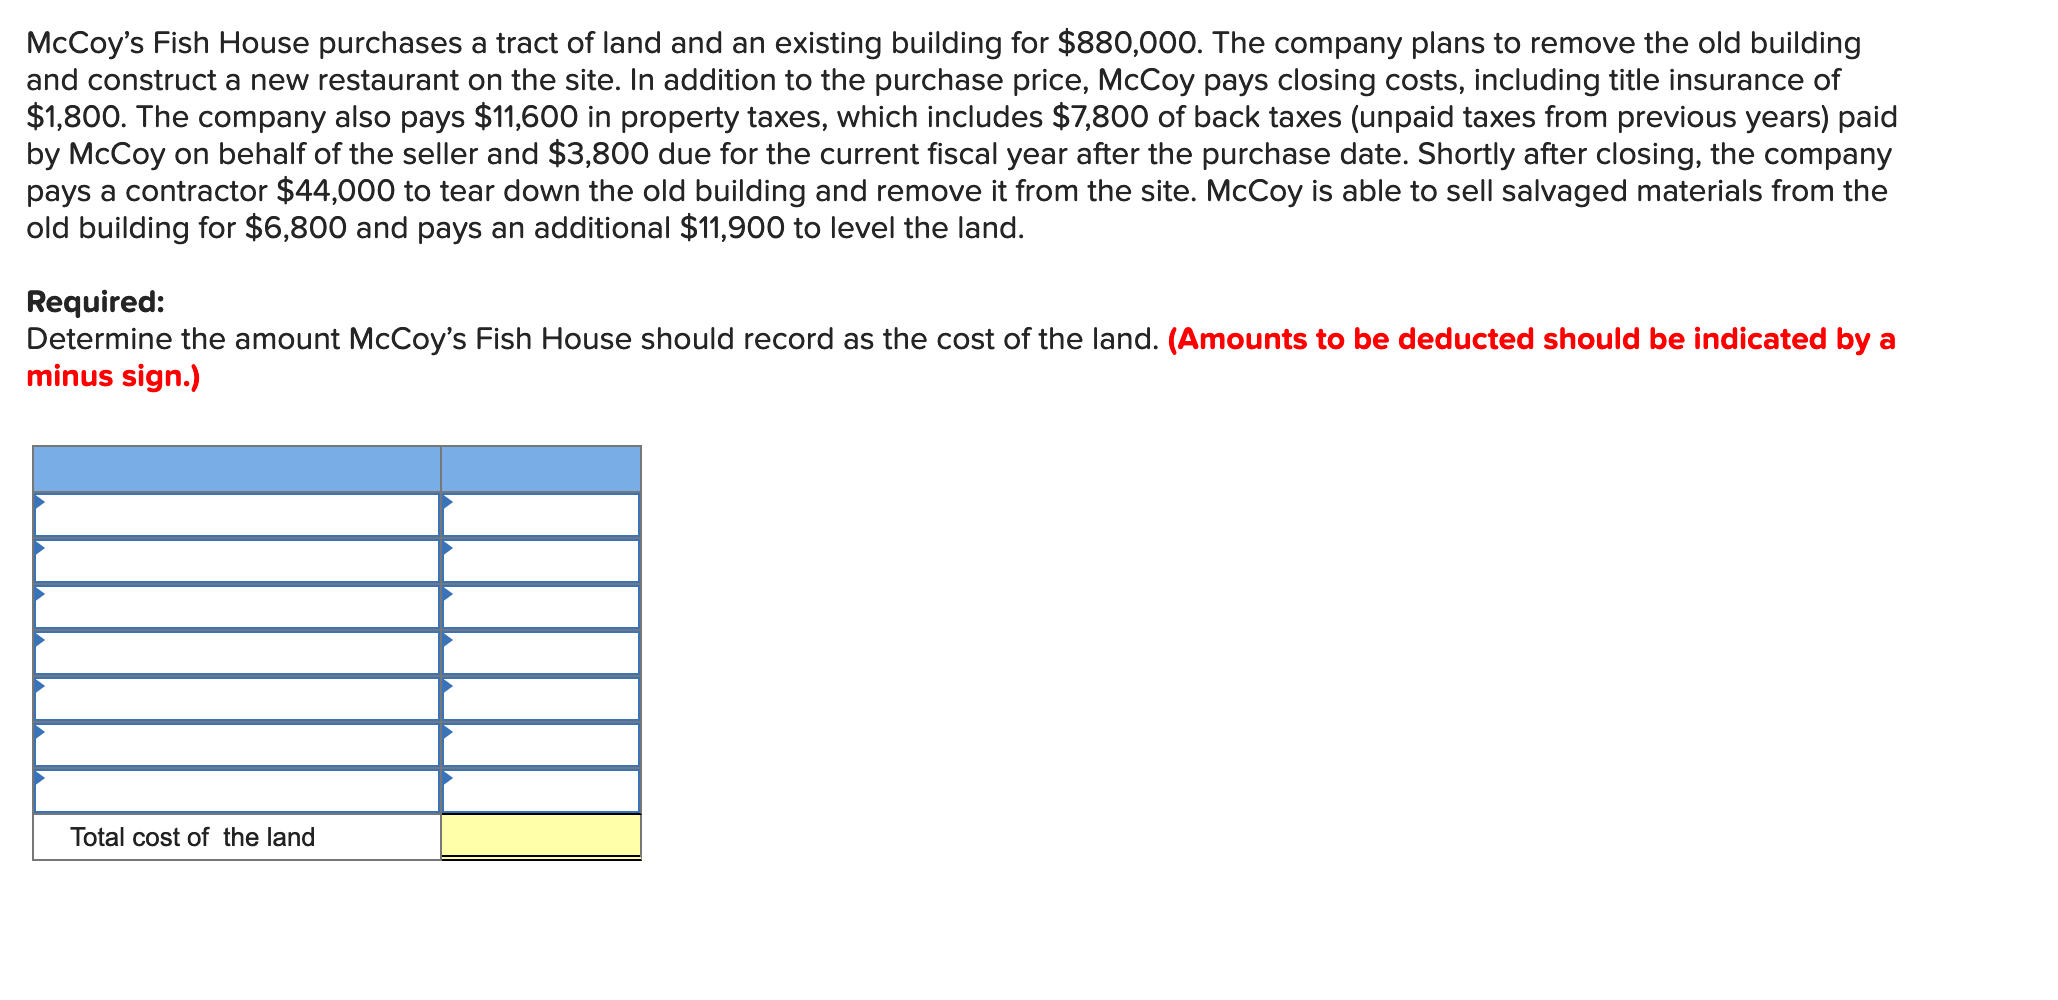 McCoy's Fish House purchases a tract of land and an existing building for $880,000. The company plans to remove the old building
and construct a new restaurant on the site. In addition to the purchase price, McCoy pays closing costs, including title insurance of
$1,800. The company also pays $11,600 in property taxes, which includes $7,800 of back taxes (unpaid taxes from previous years) paid
by McCoy on behalf of the seller and $3,800 due for the current fiscal year after the purchase date. Shortly after closing, the company
pays a contractor $44,000 to tear down the old building and remove it from the site. McCoy is able to sell salvaged materials from the
old building for $6,800 and pays an additional $11,900 to level the land.
Required:
Determine the amount McCoy's Fish House should record as the cost of the land. (Amounts to be deducted should be indicated by a
minus sign.)
Total cost of the land
